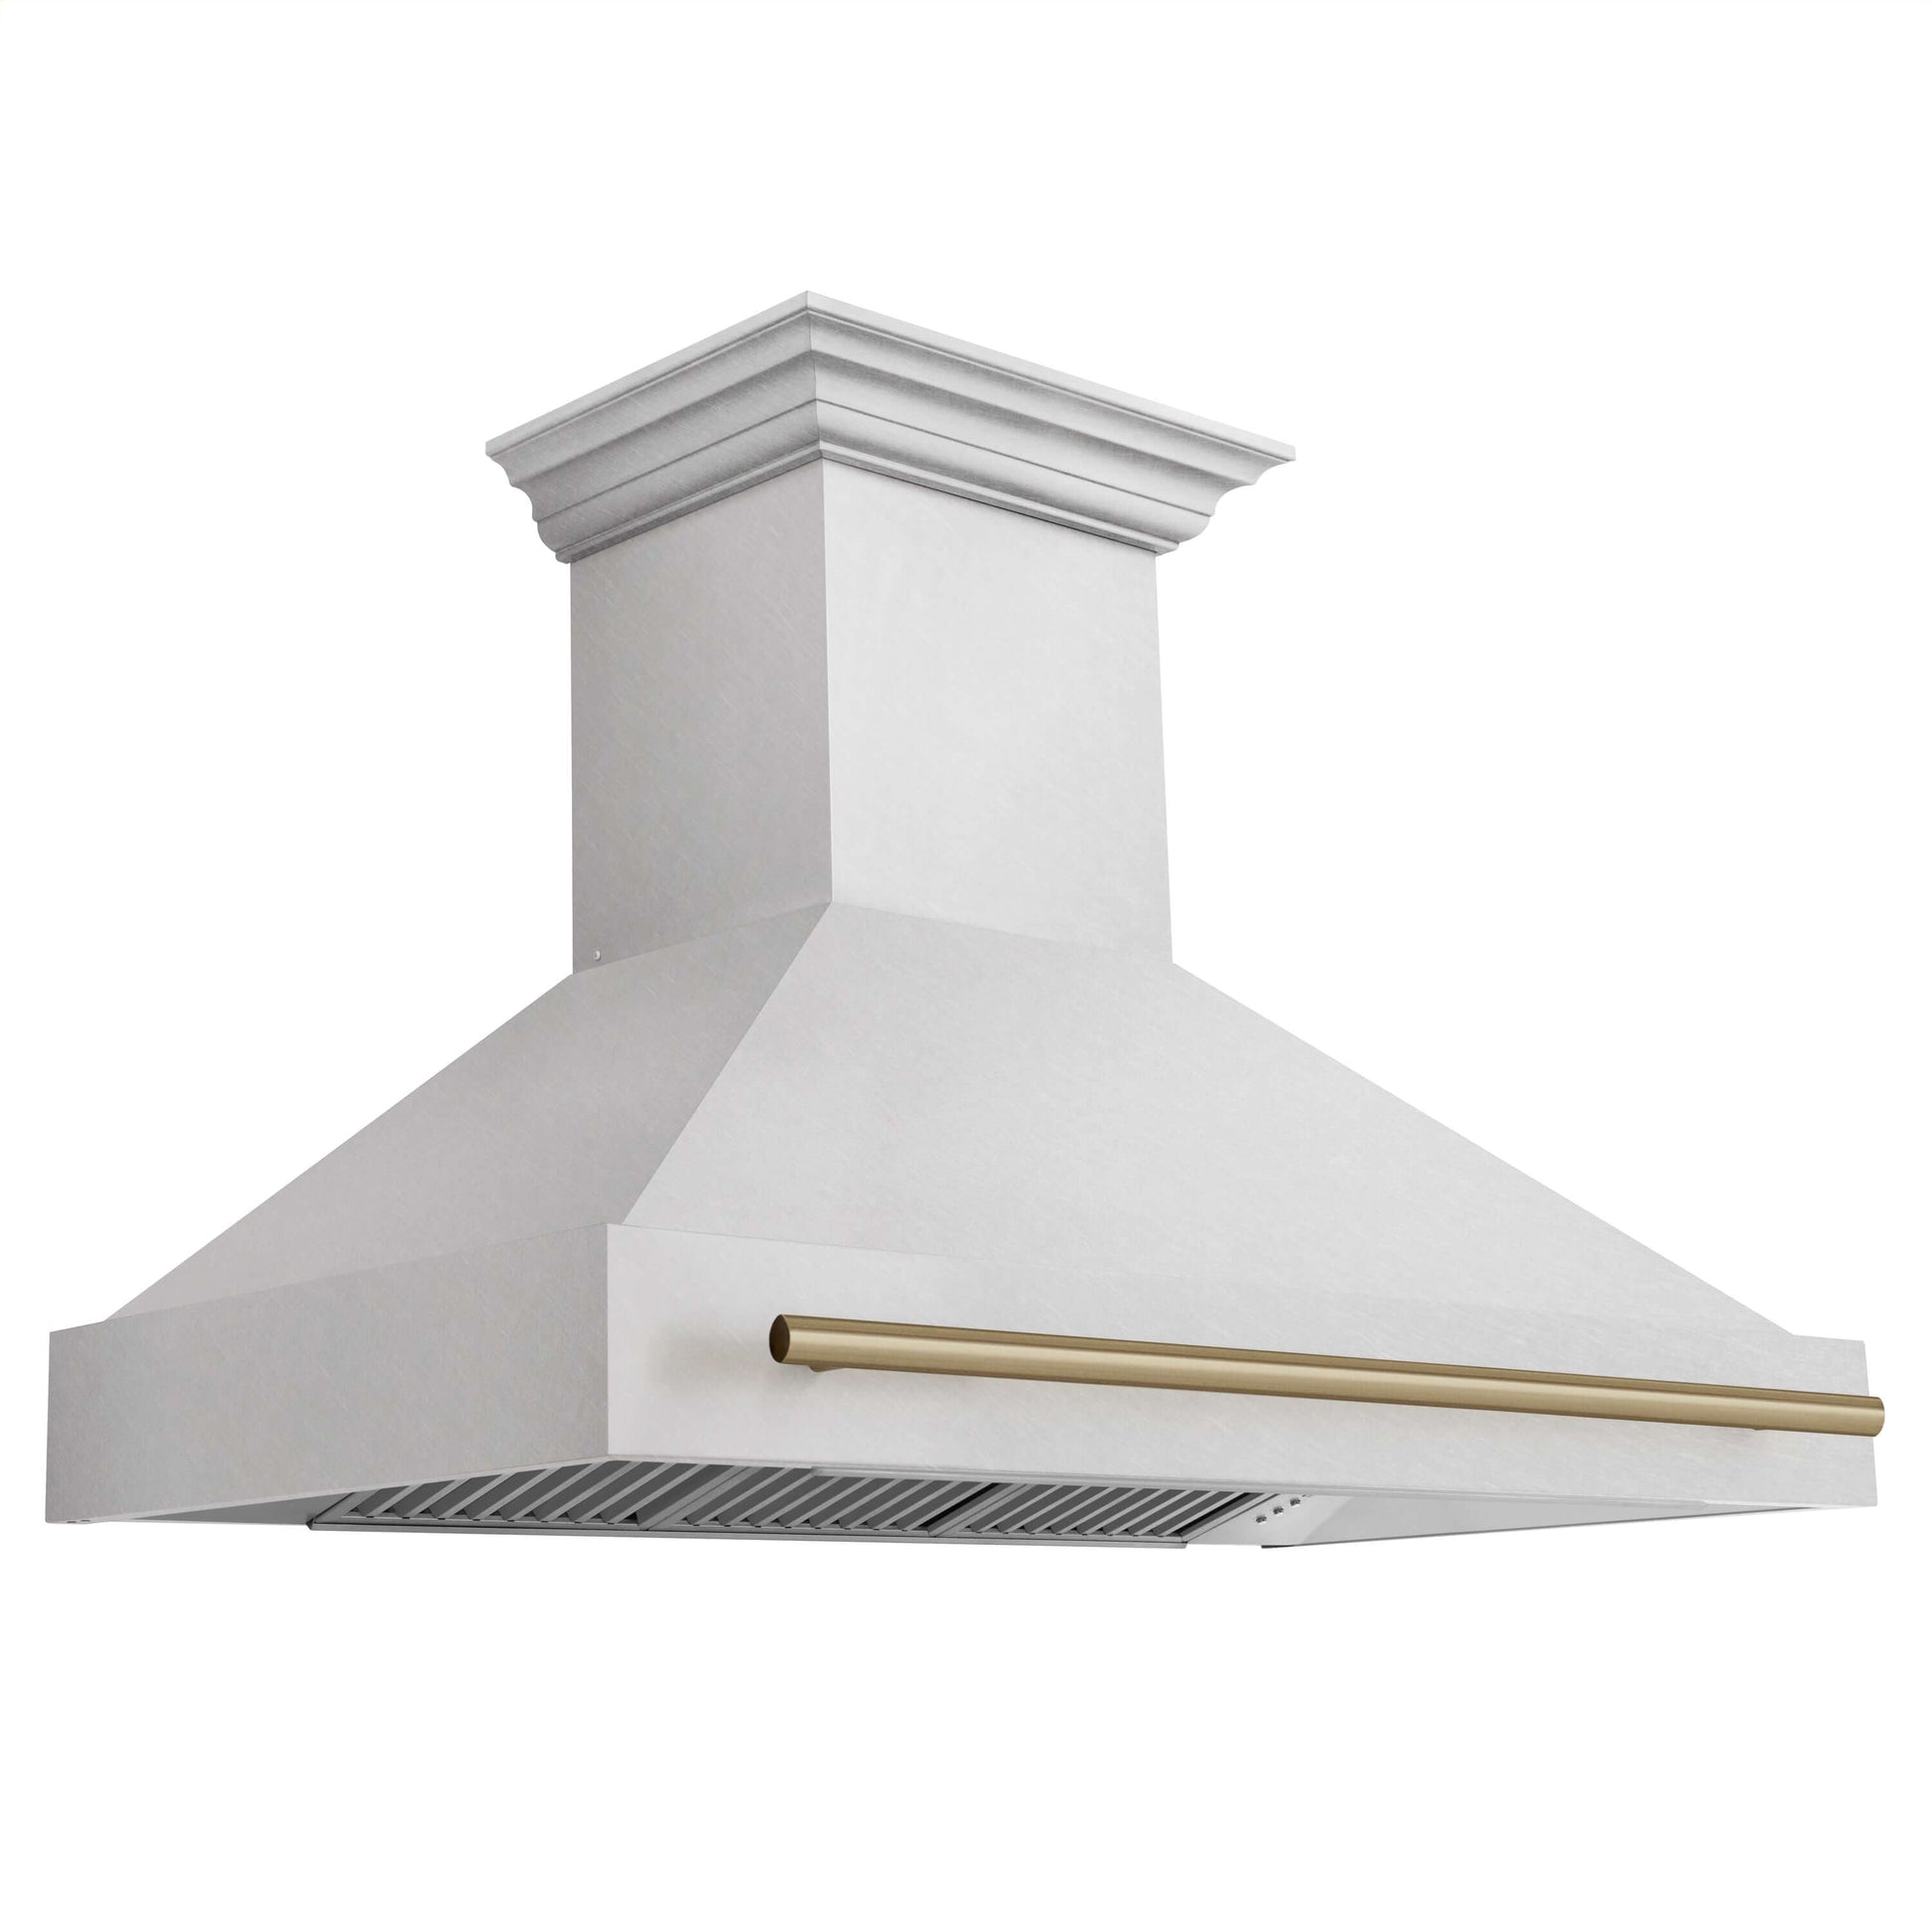 ZLINE Autograph Edition 48" Range Hood - DuraSnow with Stainless Steel Shell